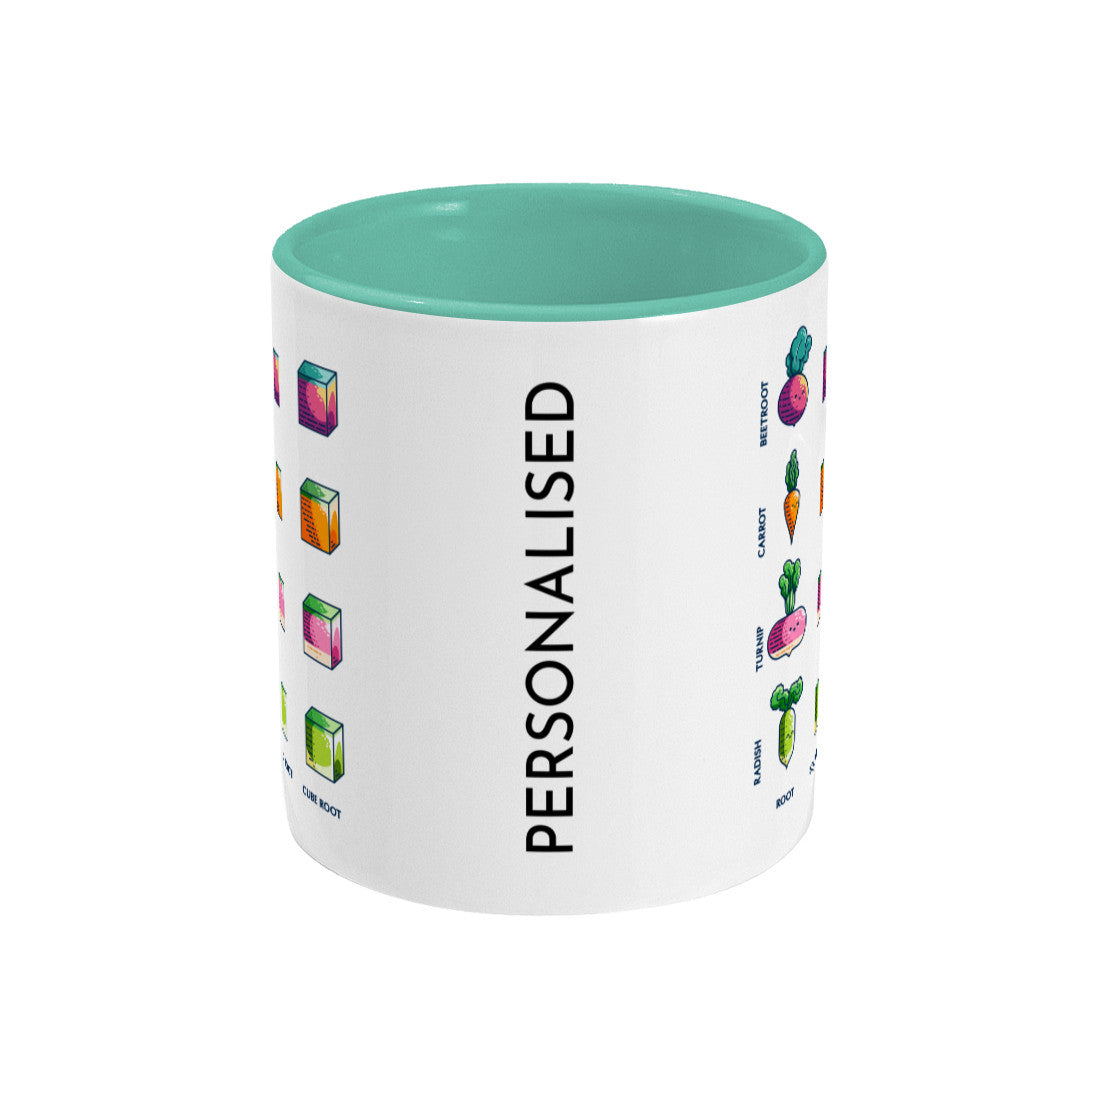 A white ceramic mug with a spearmint handle and inside, side view showing that the design is printed on both the front and back of the mug, with the the word personalised printed vertically between them.